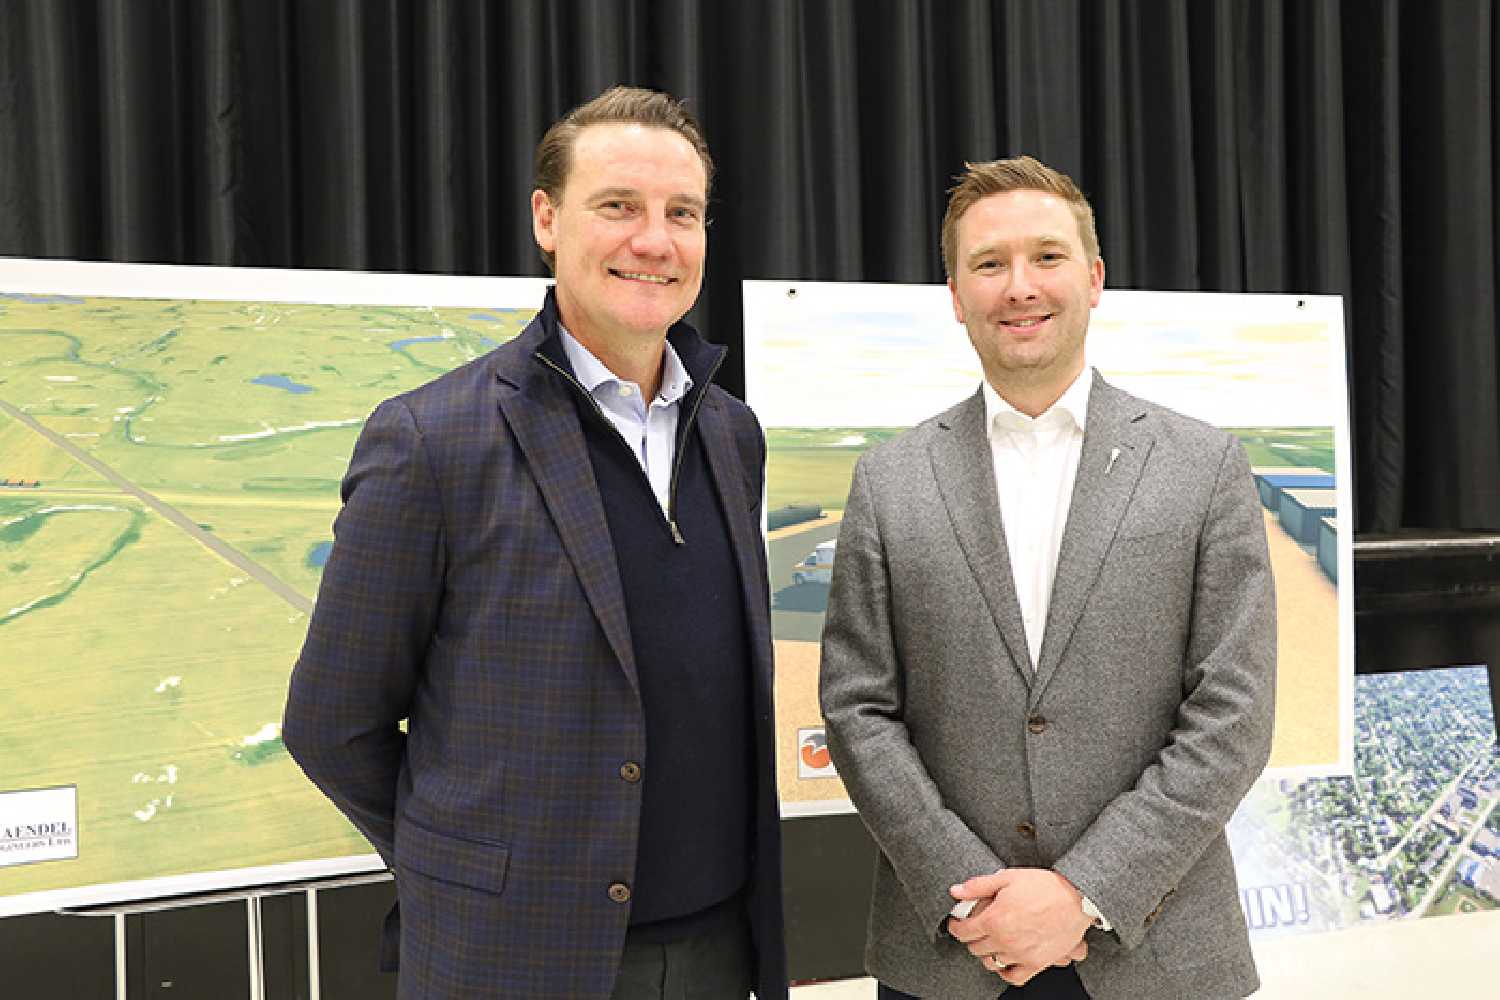 Nutrien Executive Vice President and President of Potash Chris Reynolds, left, and Saskatchewan Highways Minister Jeremy Cockrill, right, both announced new funding for Moosomin’s airport expansion project Wednesday. Nutrien has donated $2.7 million, and the province provided $1.3 million in new funding, bringing their total commitment to about $2.7 million.